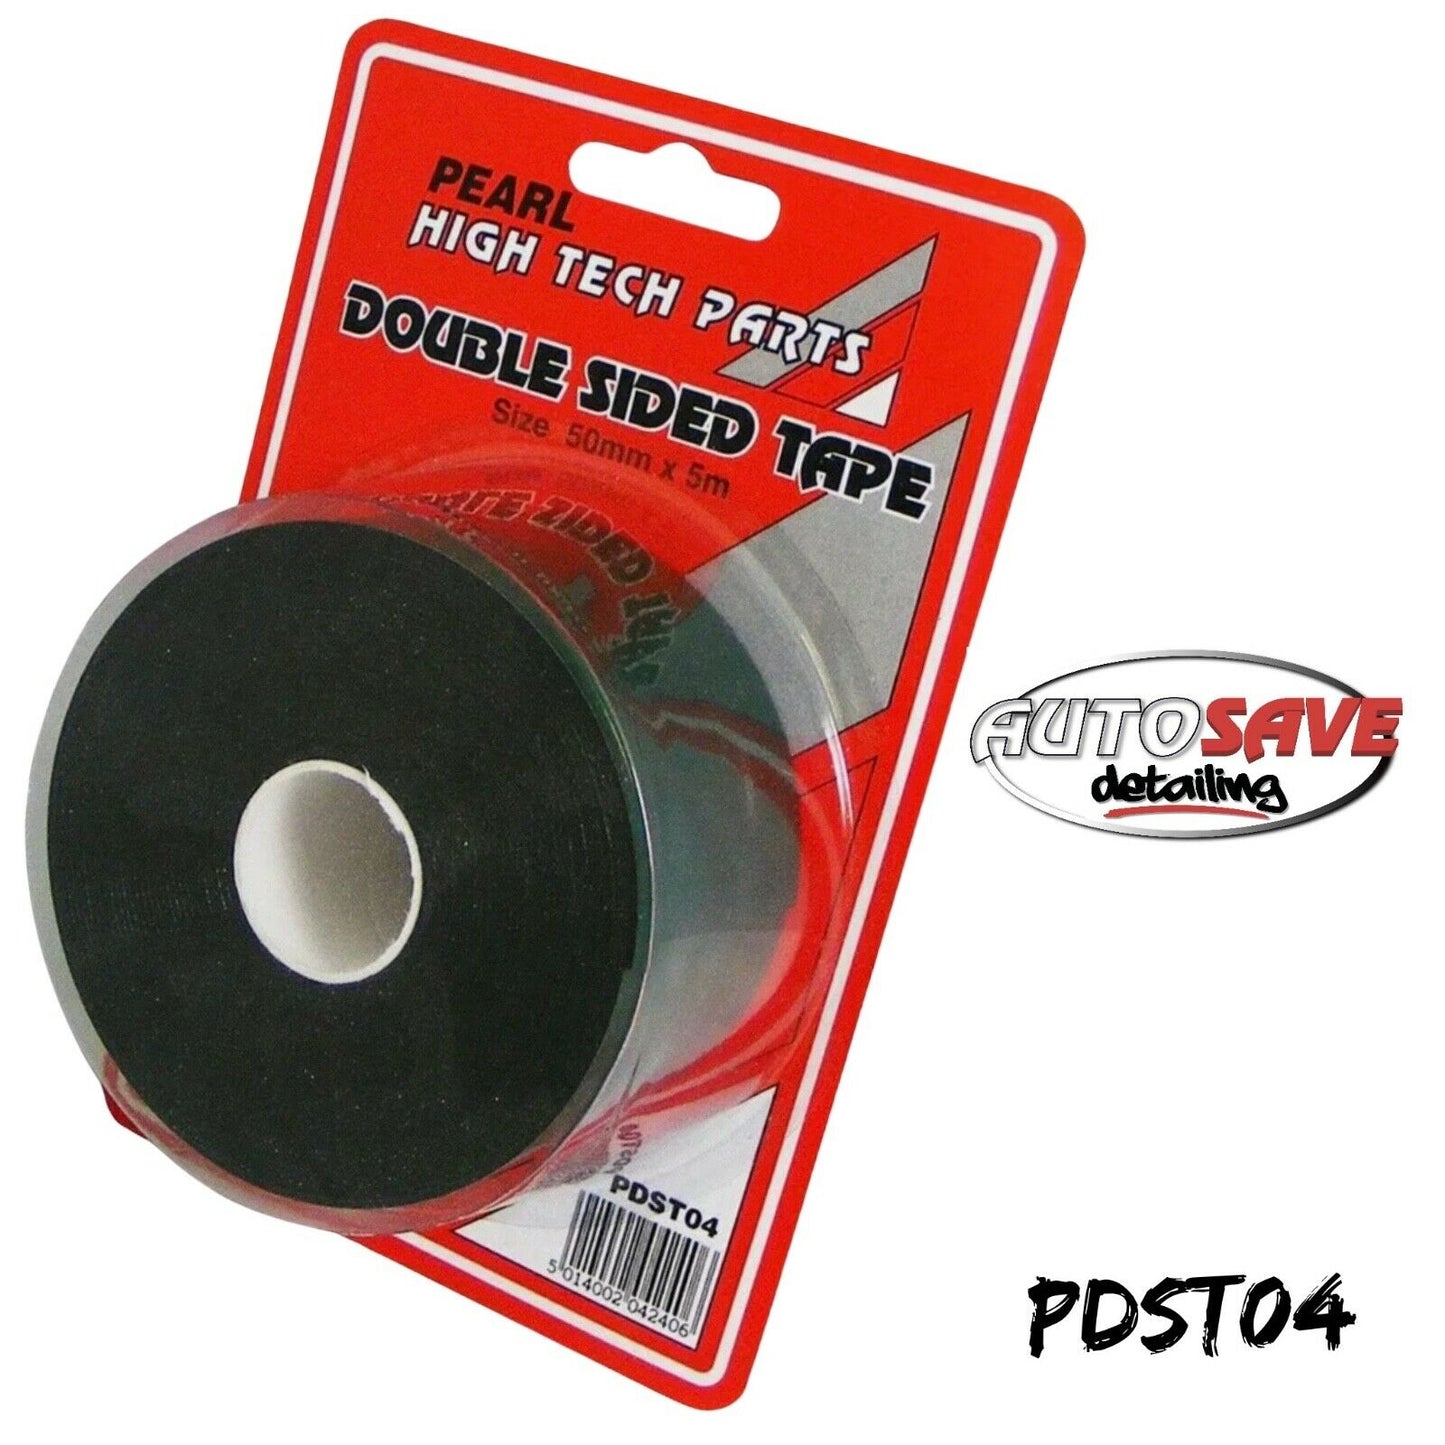 Pearl Consumables PDST04 Double Sided Tape - 25mm x 5m